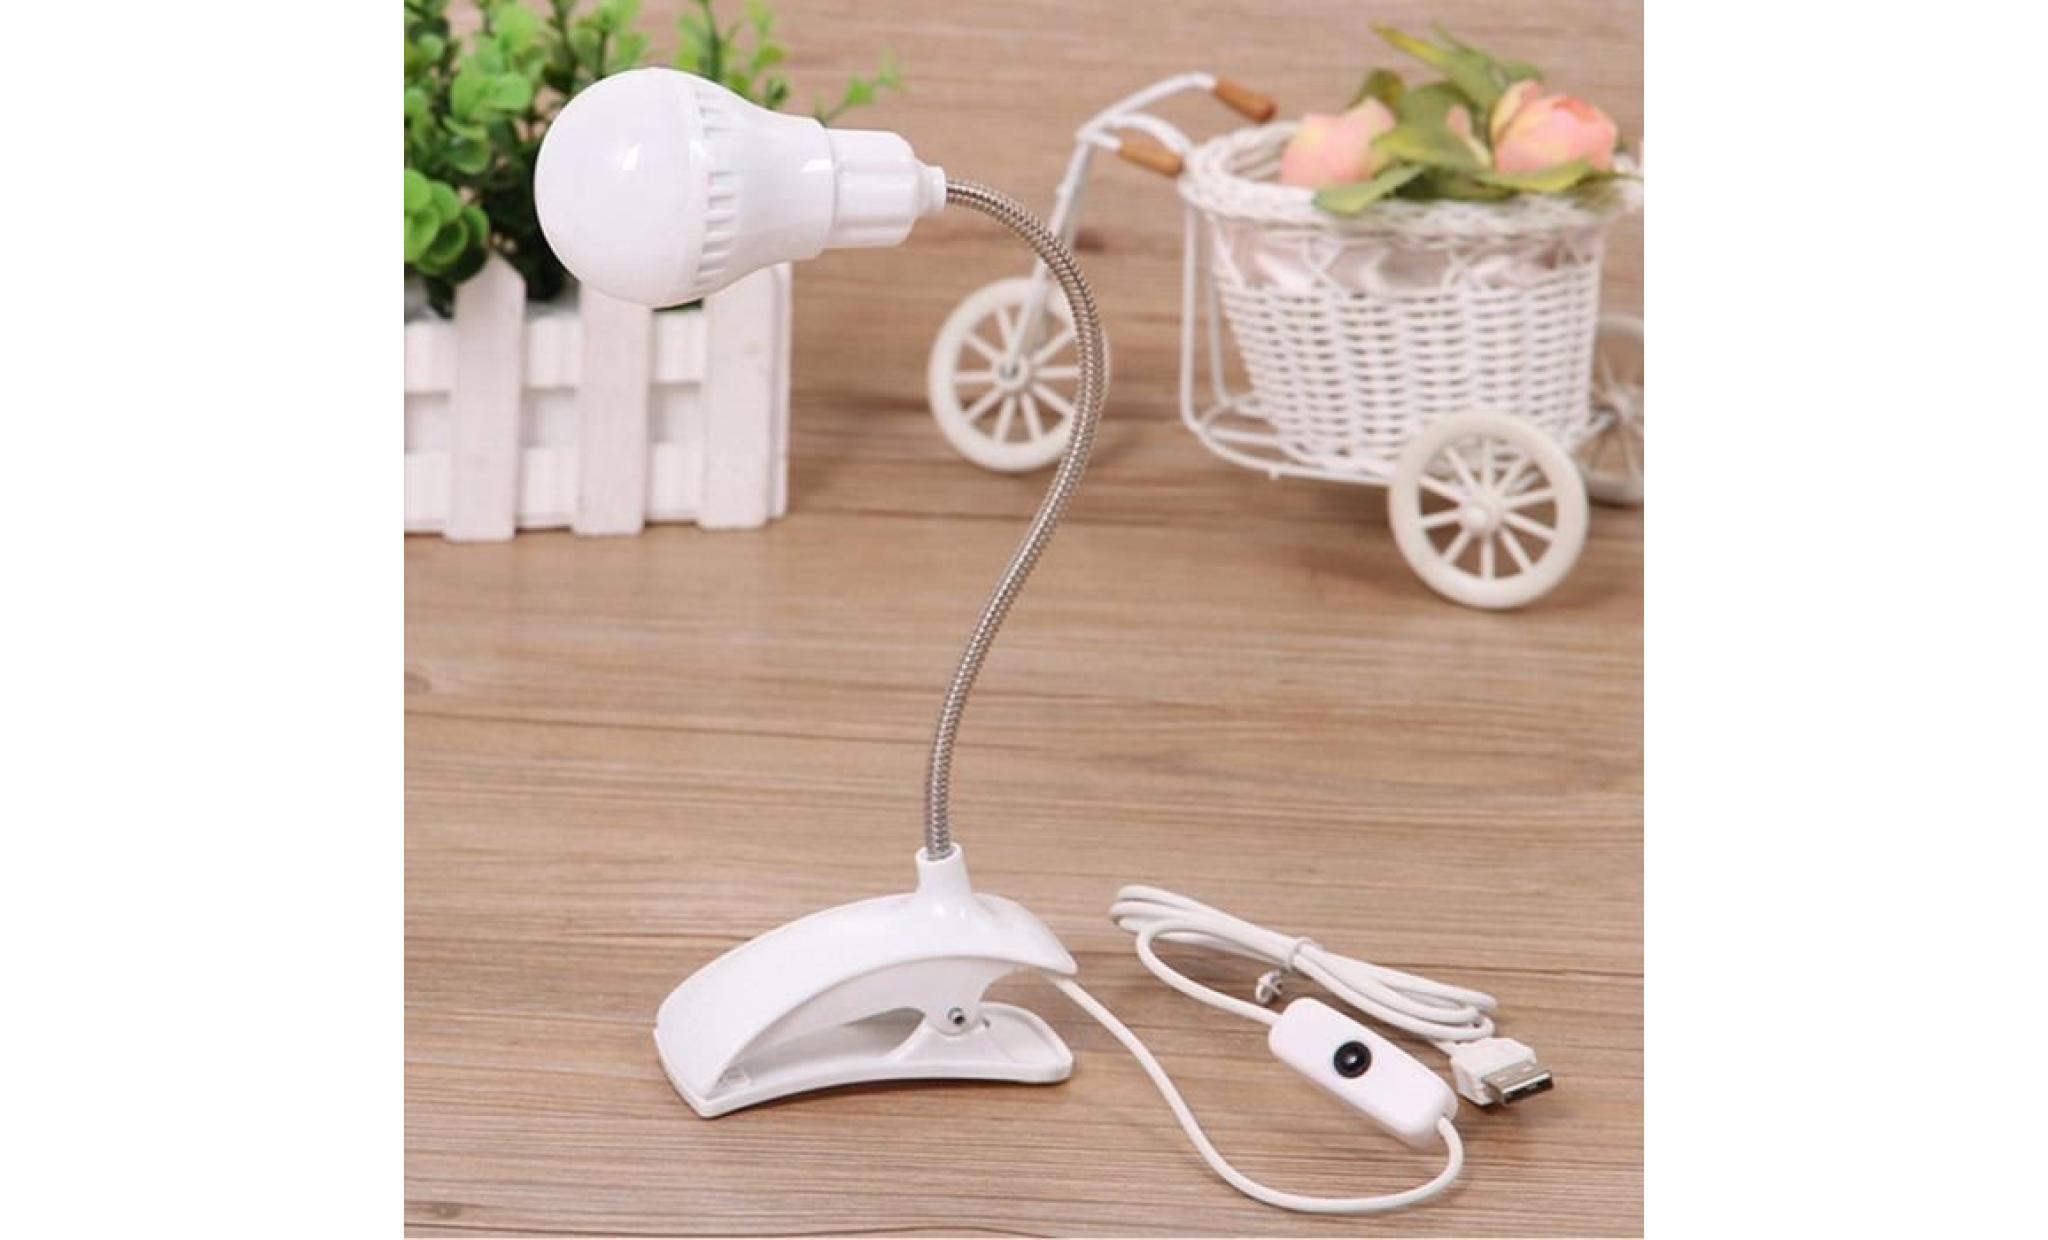 tube led new stand lampe de table usb étudiants étudiants lampe de lecture table desk lamp light wh 809